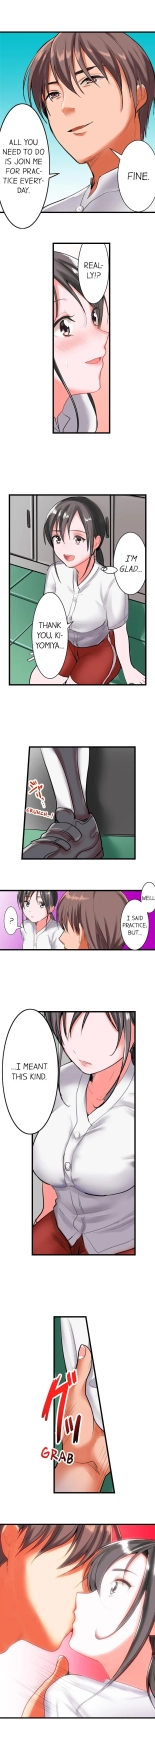 The Day She Became a Sex Toy (Complete] : página 12